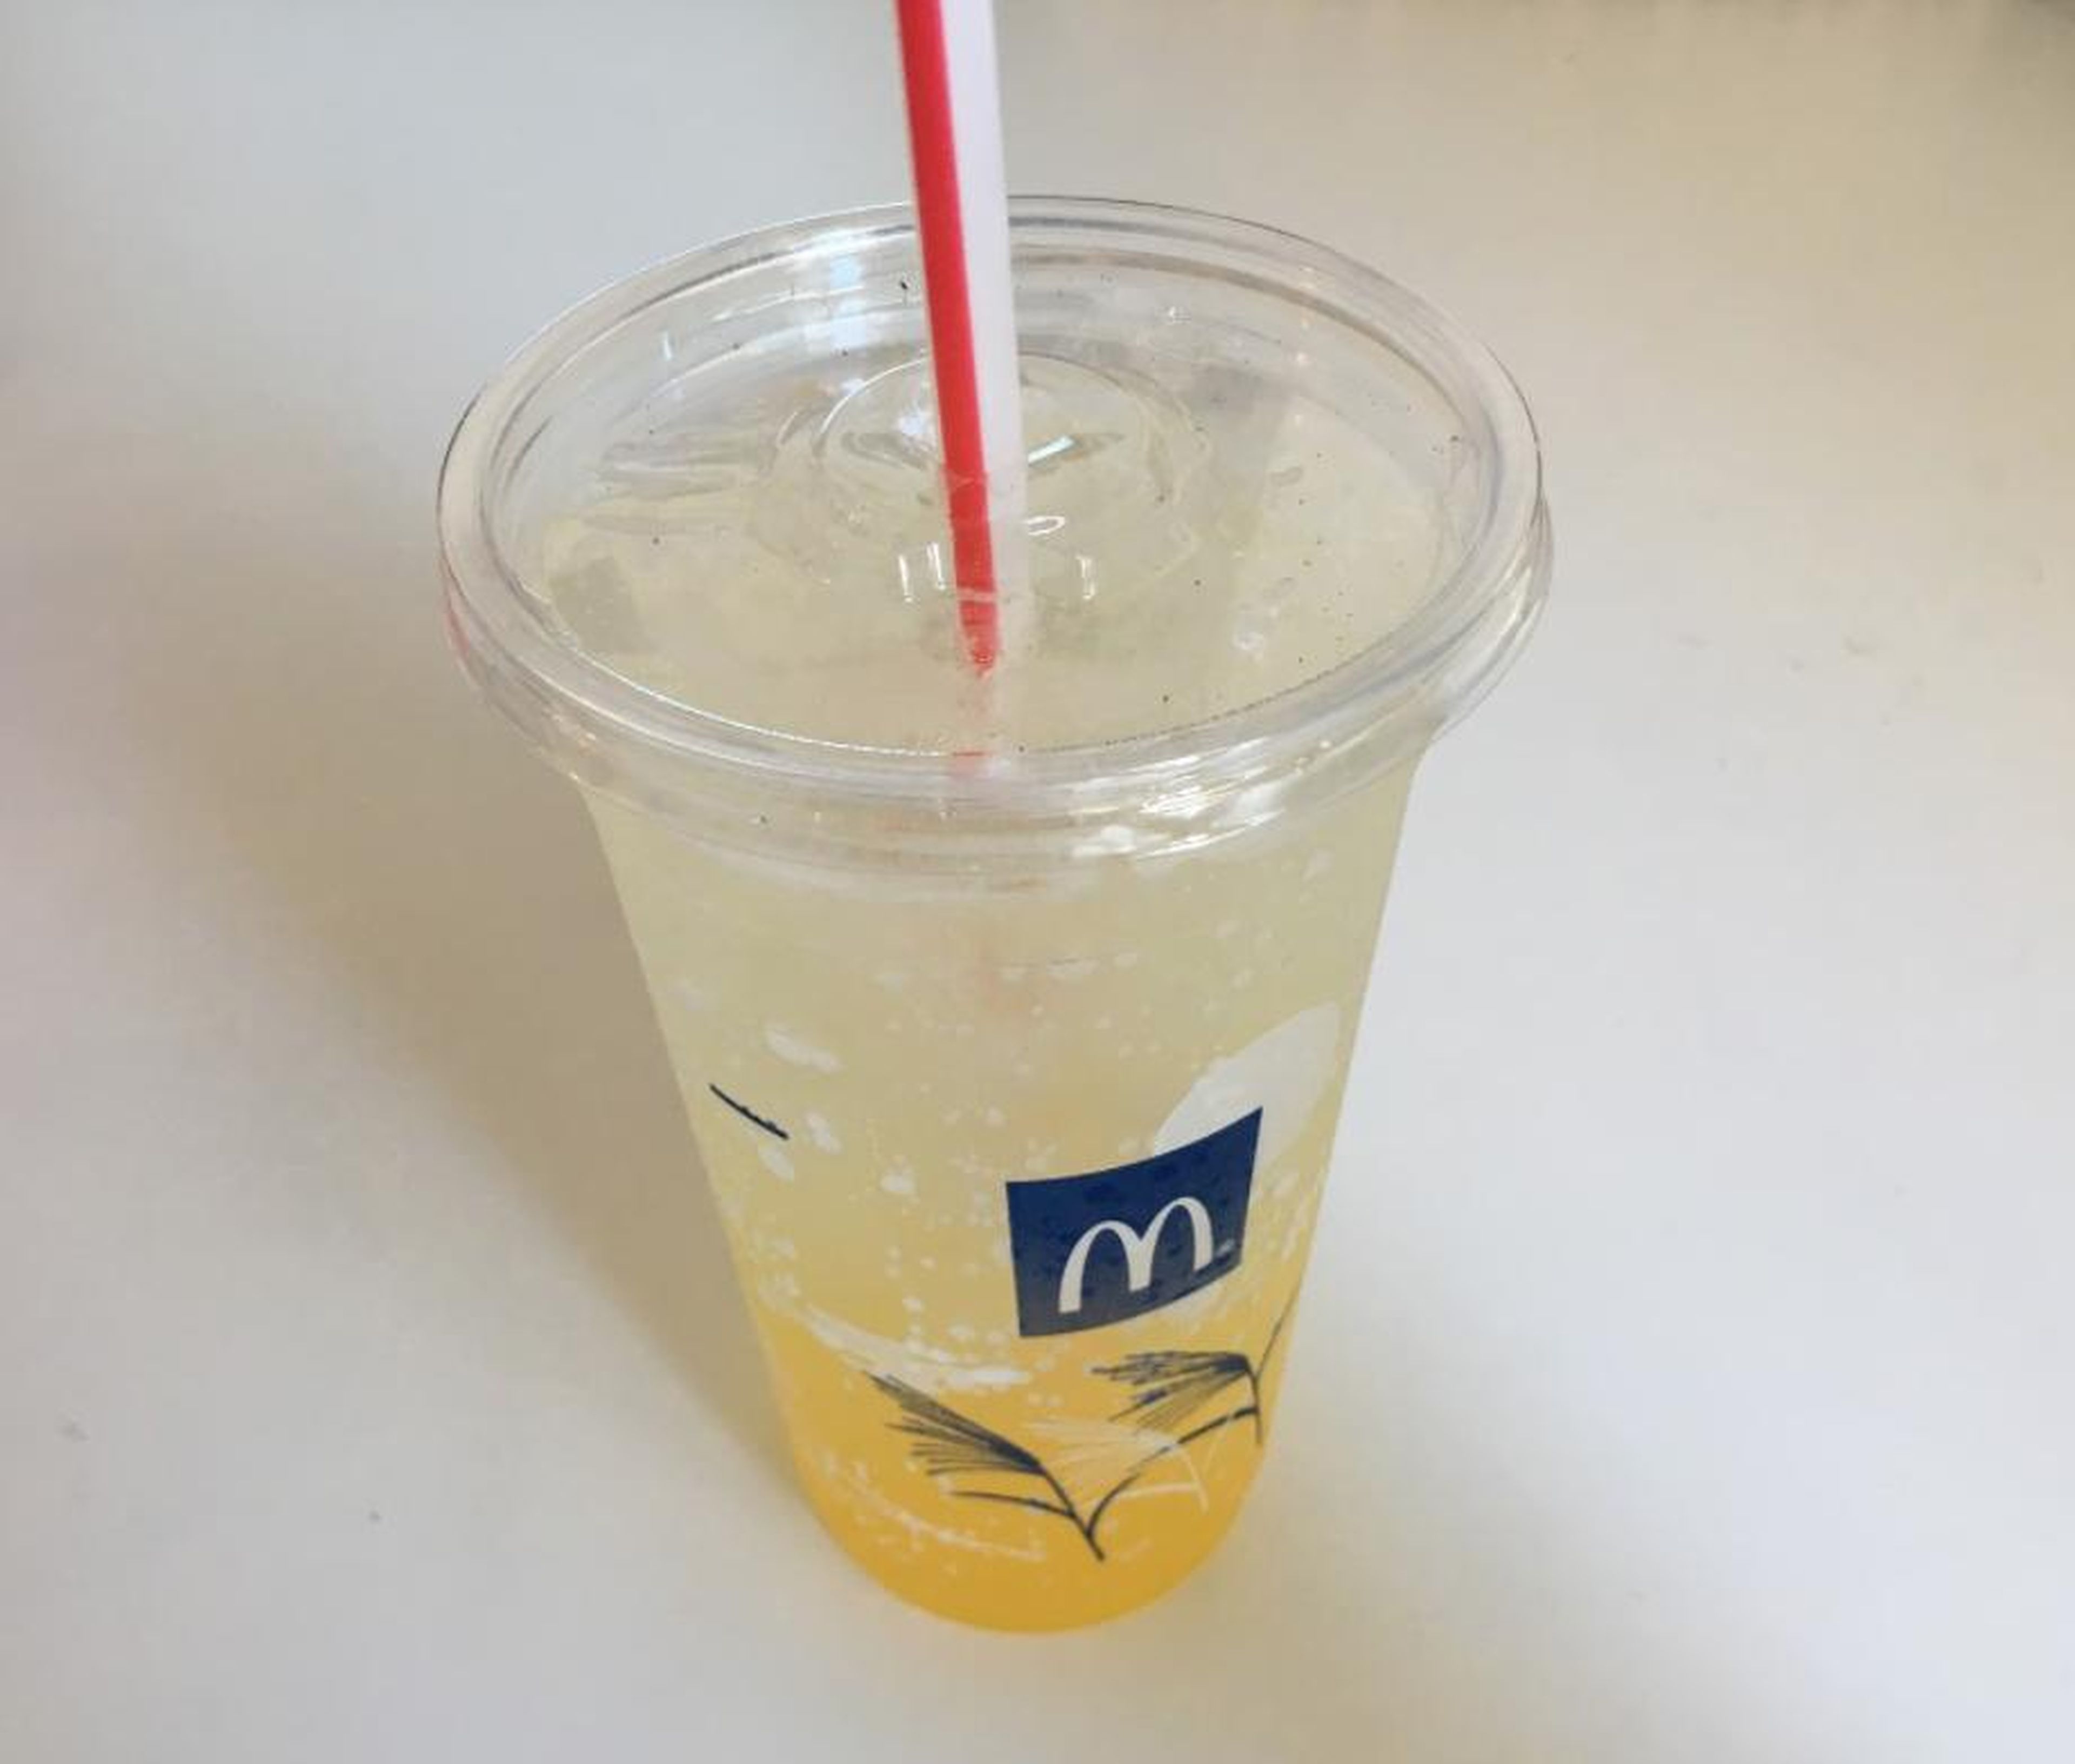 We also tried the Yuzu McFizz. This was supposed to have the sour-sweet citrus flavor that the Yuzu has. However, it was like drinking a yellow, more citrus-flavored Sprite.